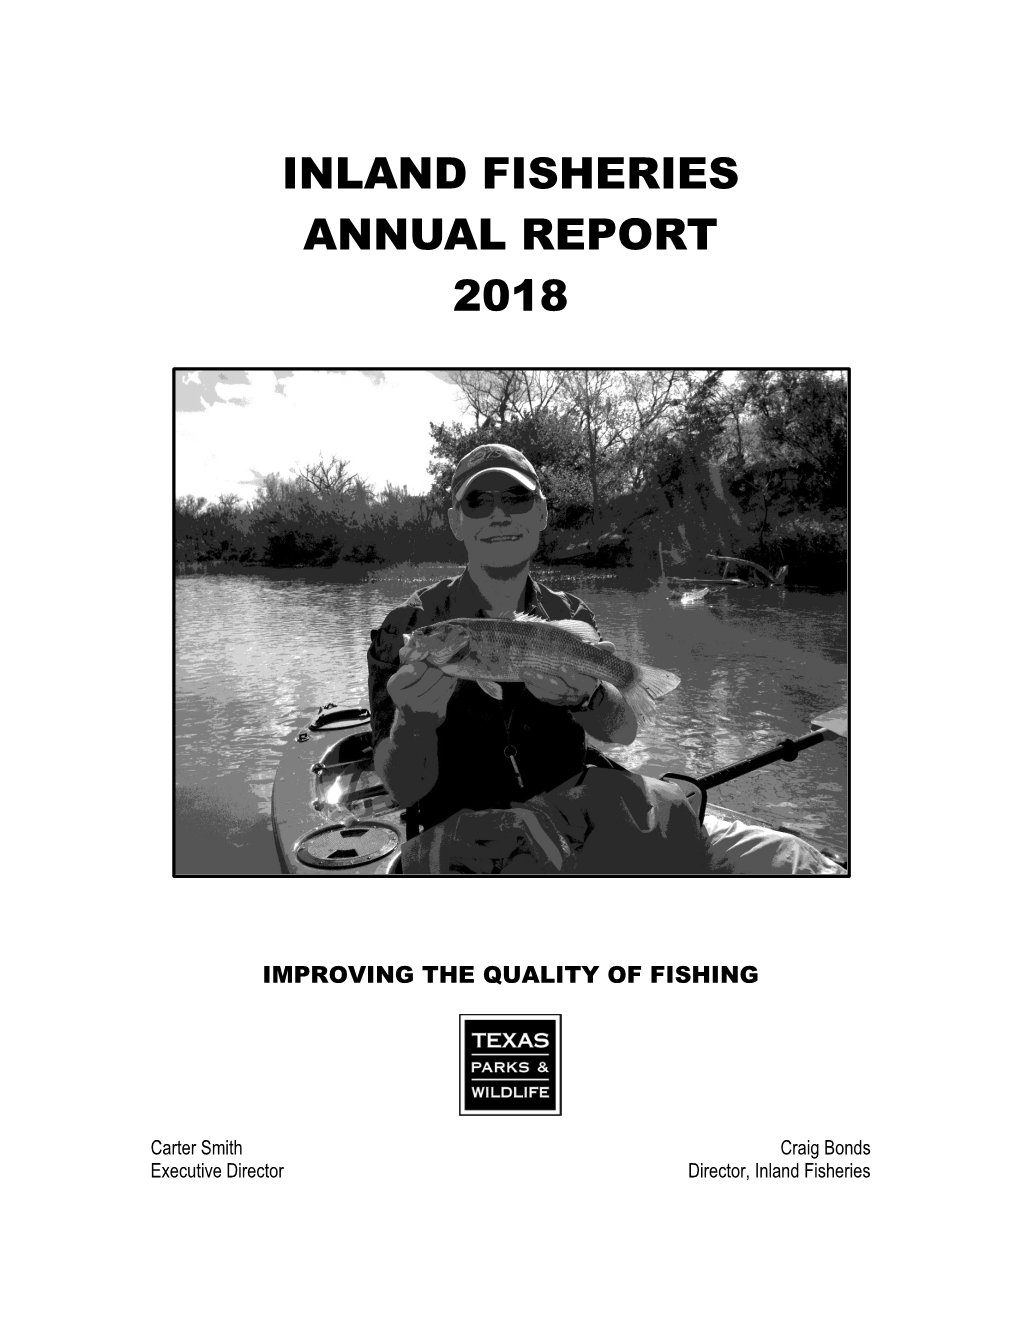 Inland Fisheries Annual Report 2018